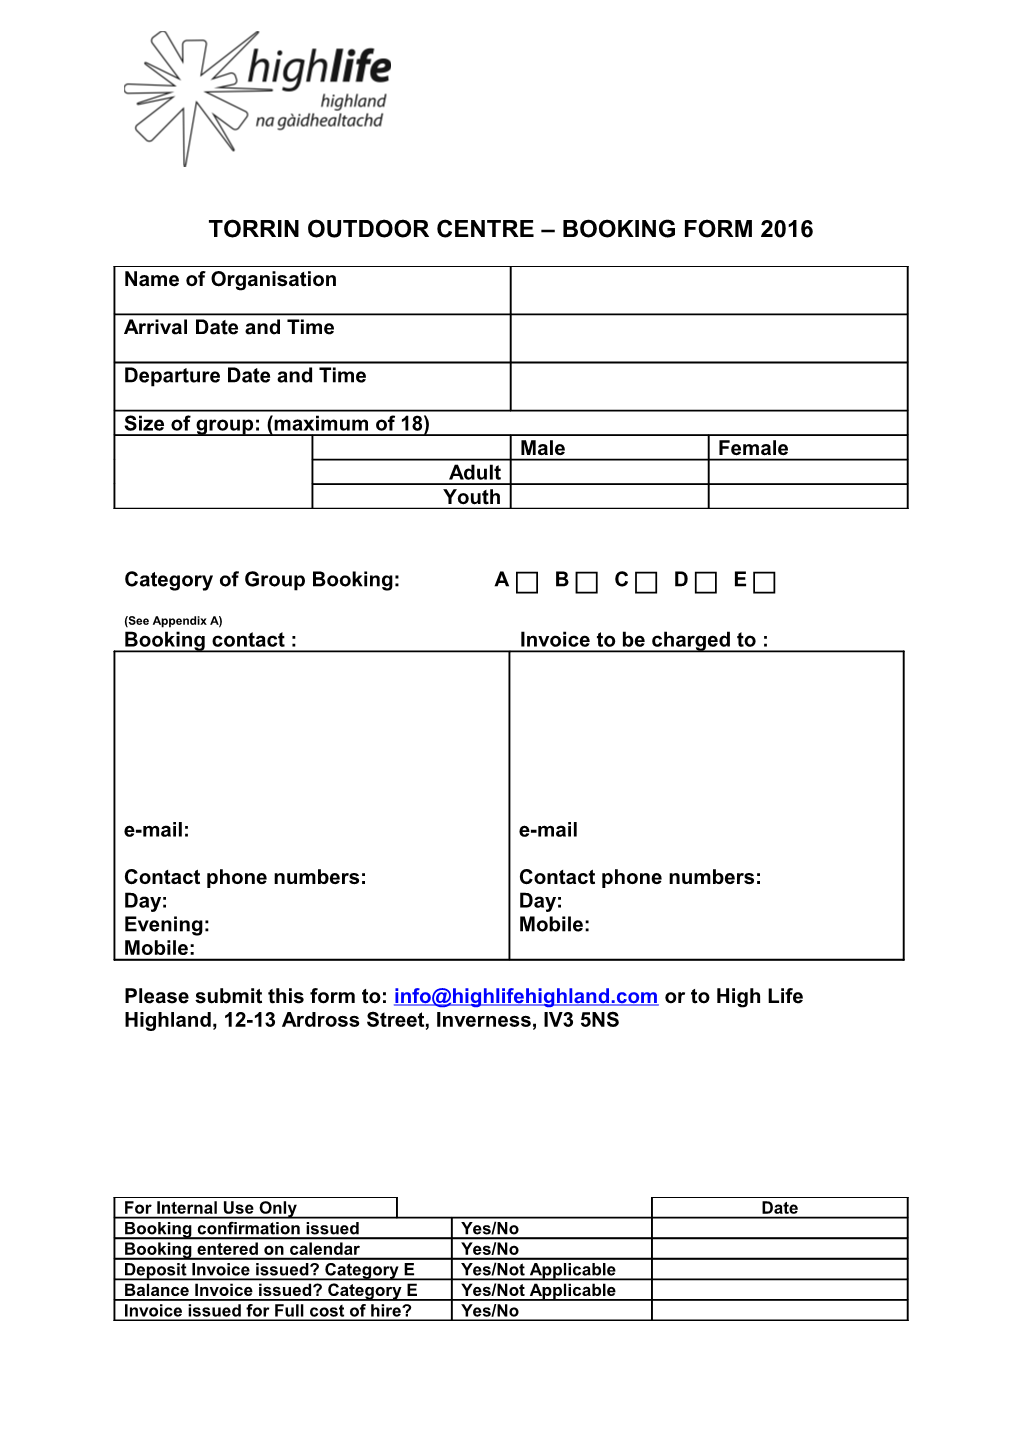 Torrin Outdoor Centre Booking Form 2016